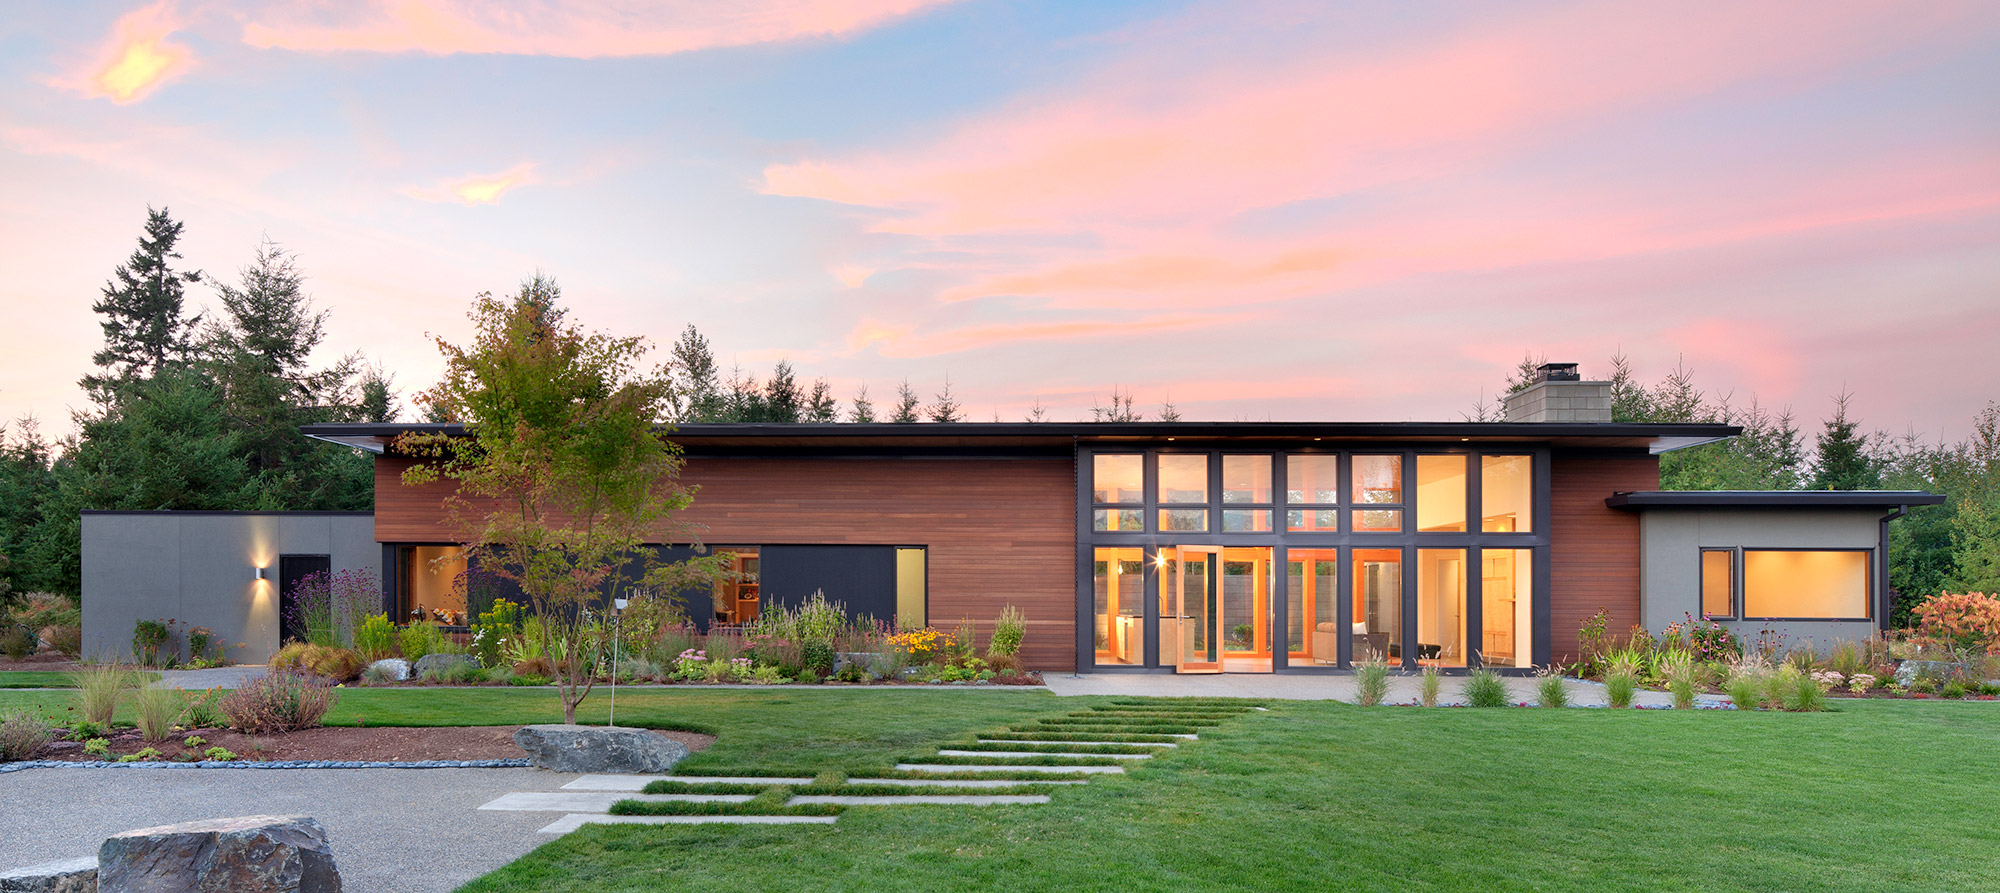 Exterior view of the Olympia Prairie Home, designed by an eco-friendly home architect firm specializing in sustainable architecture